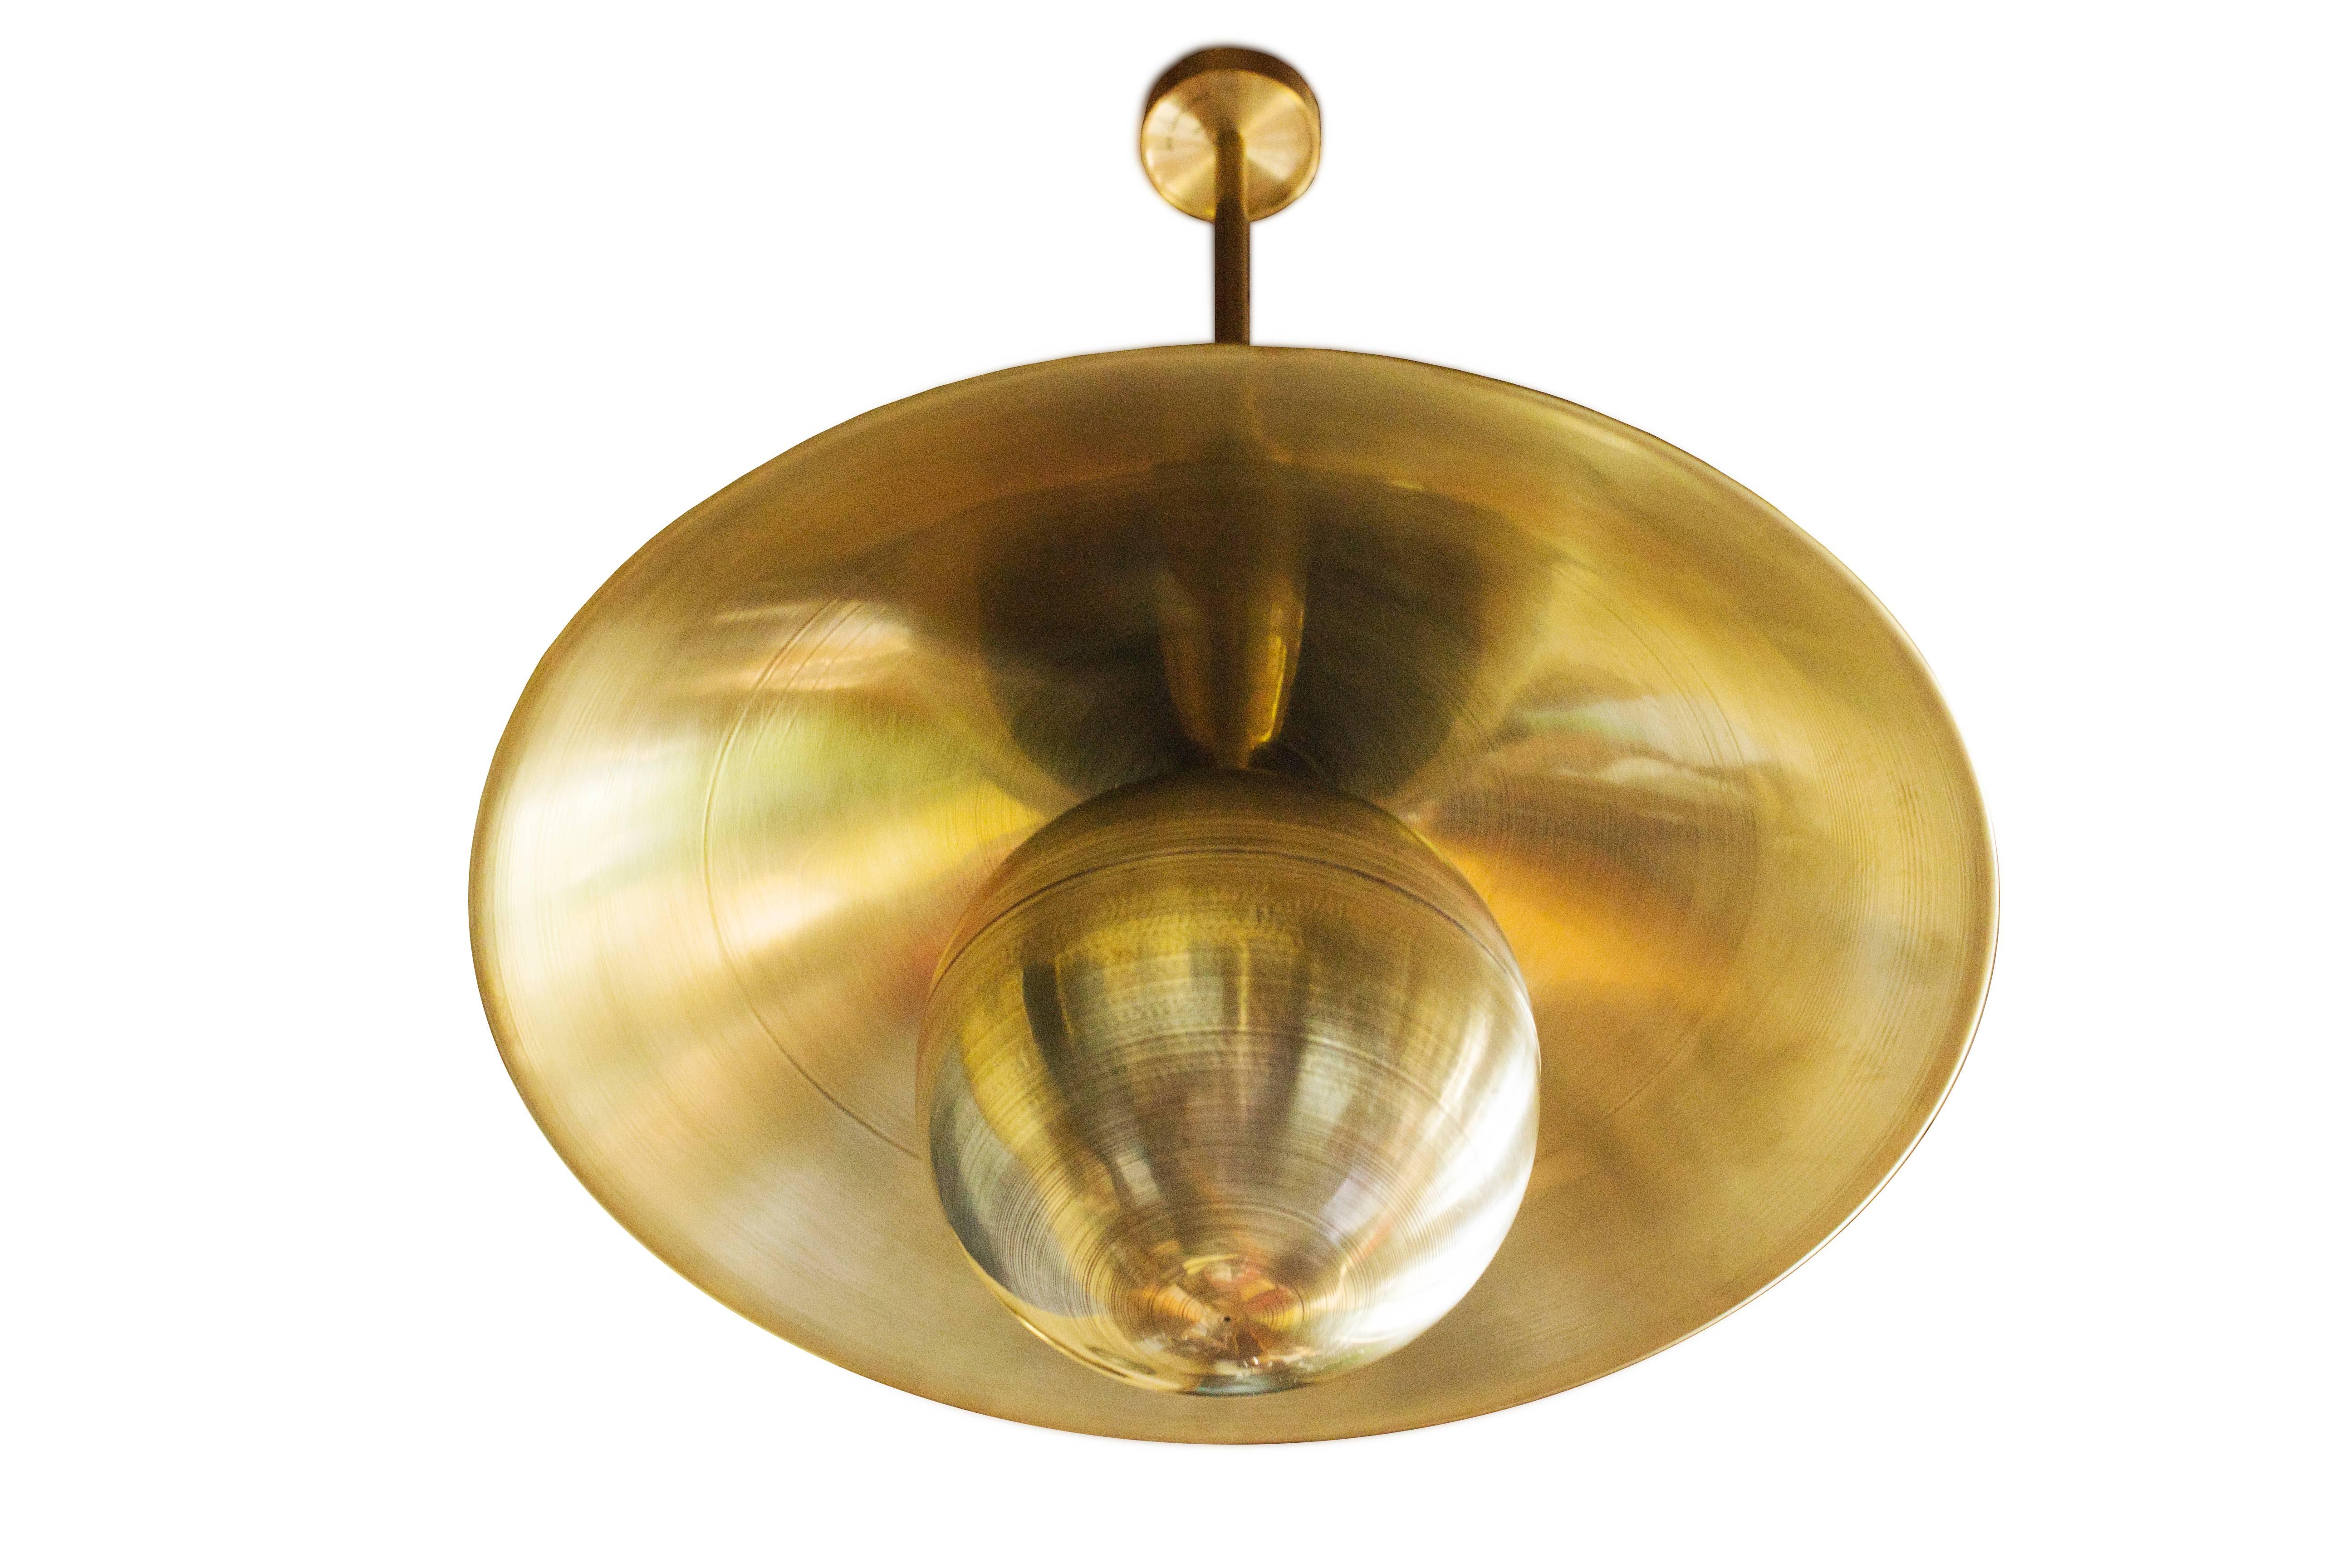 Metropolis brass sconce lamp by Jan Garncarek

Dimensions: 100 x 52 x cm
Material: Brass
Handcrafted by Jan Garncarek.
Signed and numbered

Jan Garncarek is an important contemporary designer, graduated from the Academy of Fine Arts in Warsaw. he